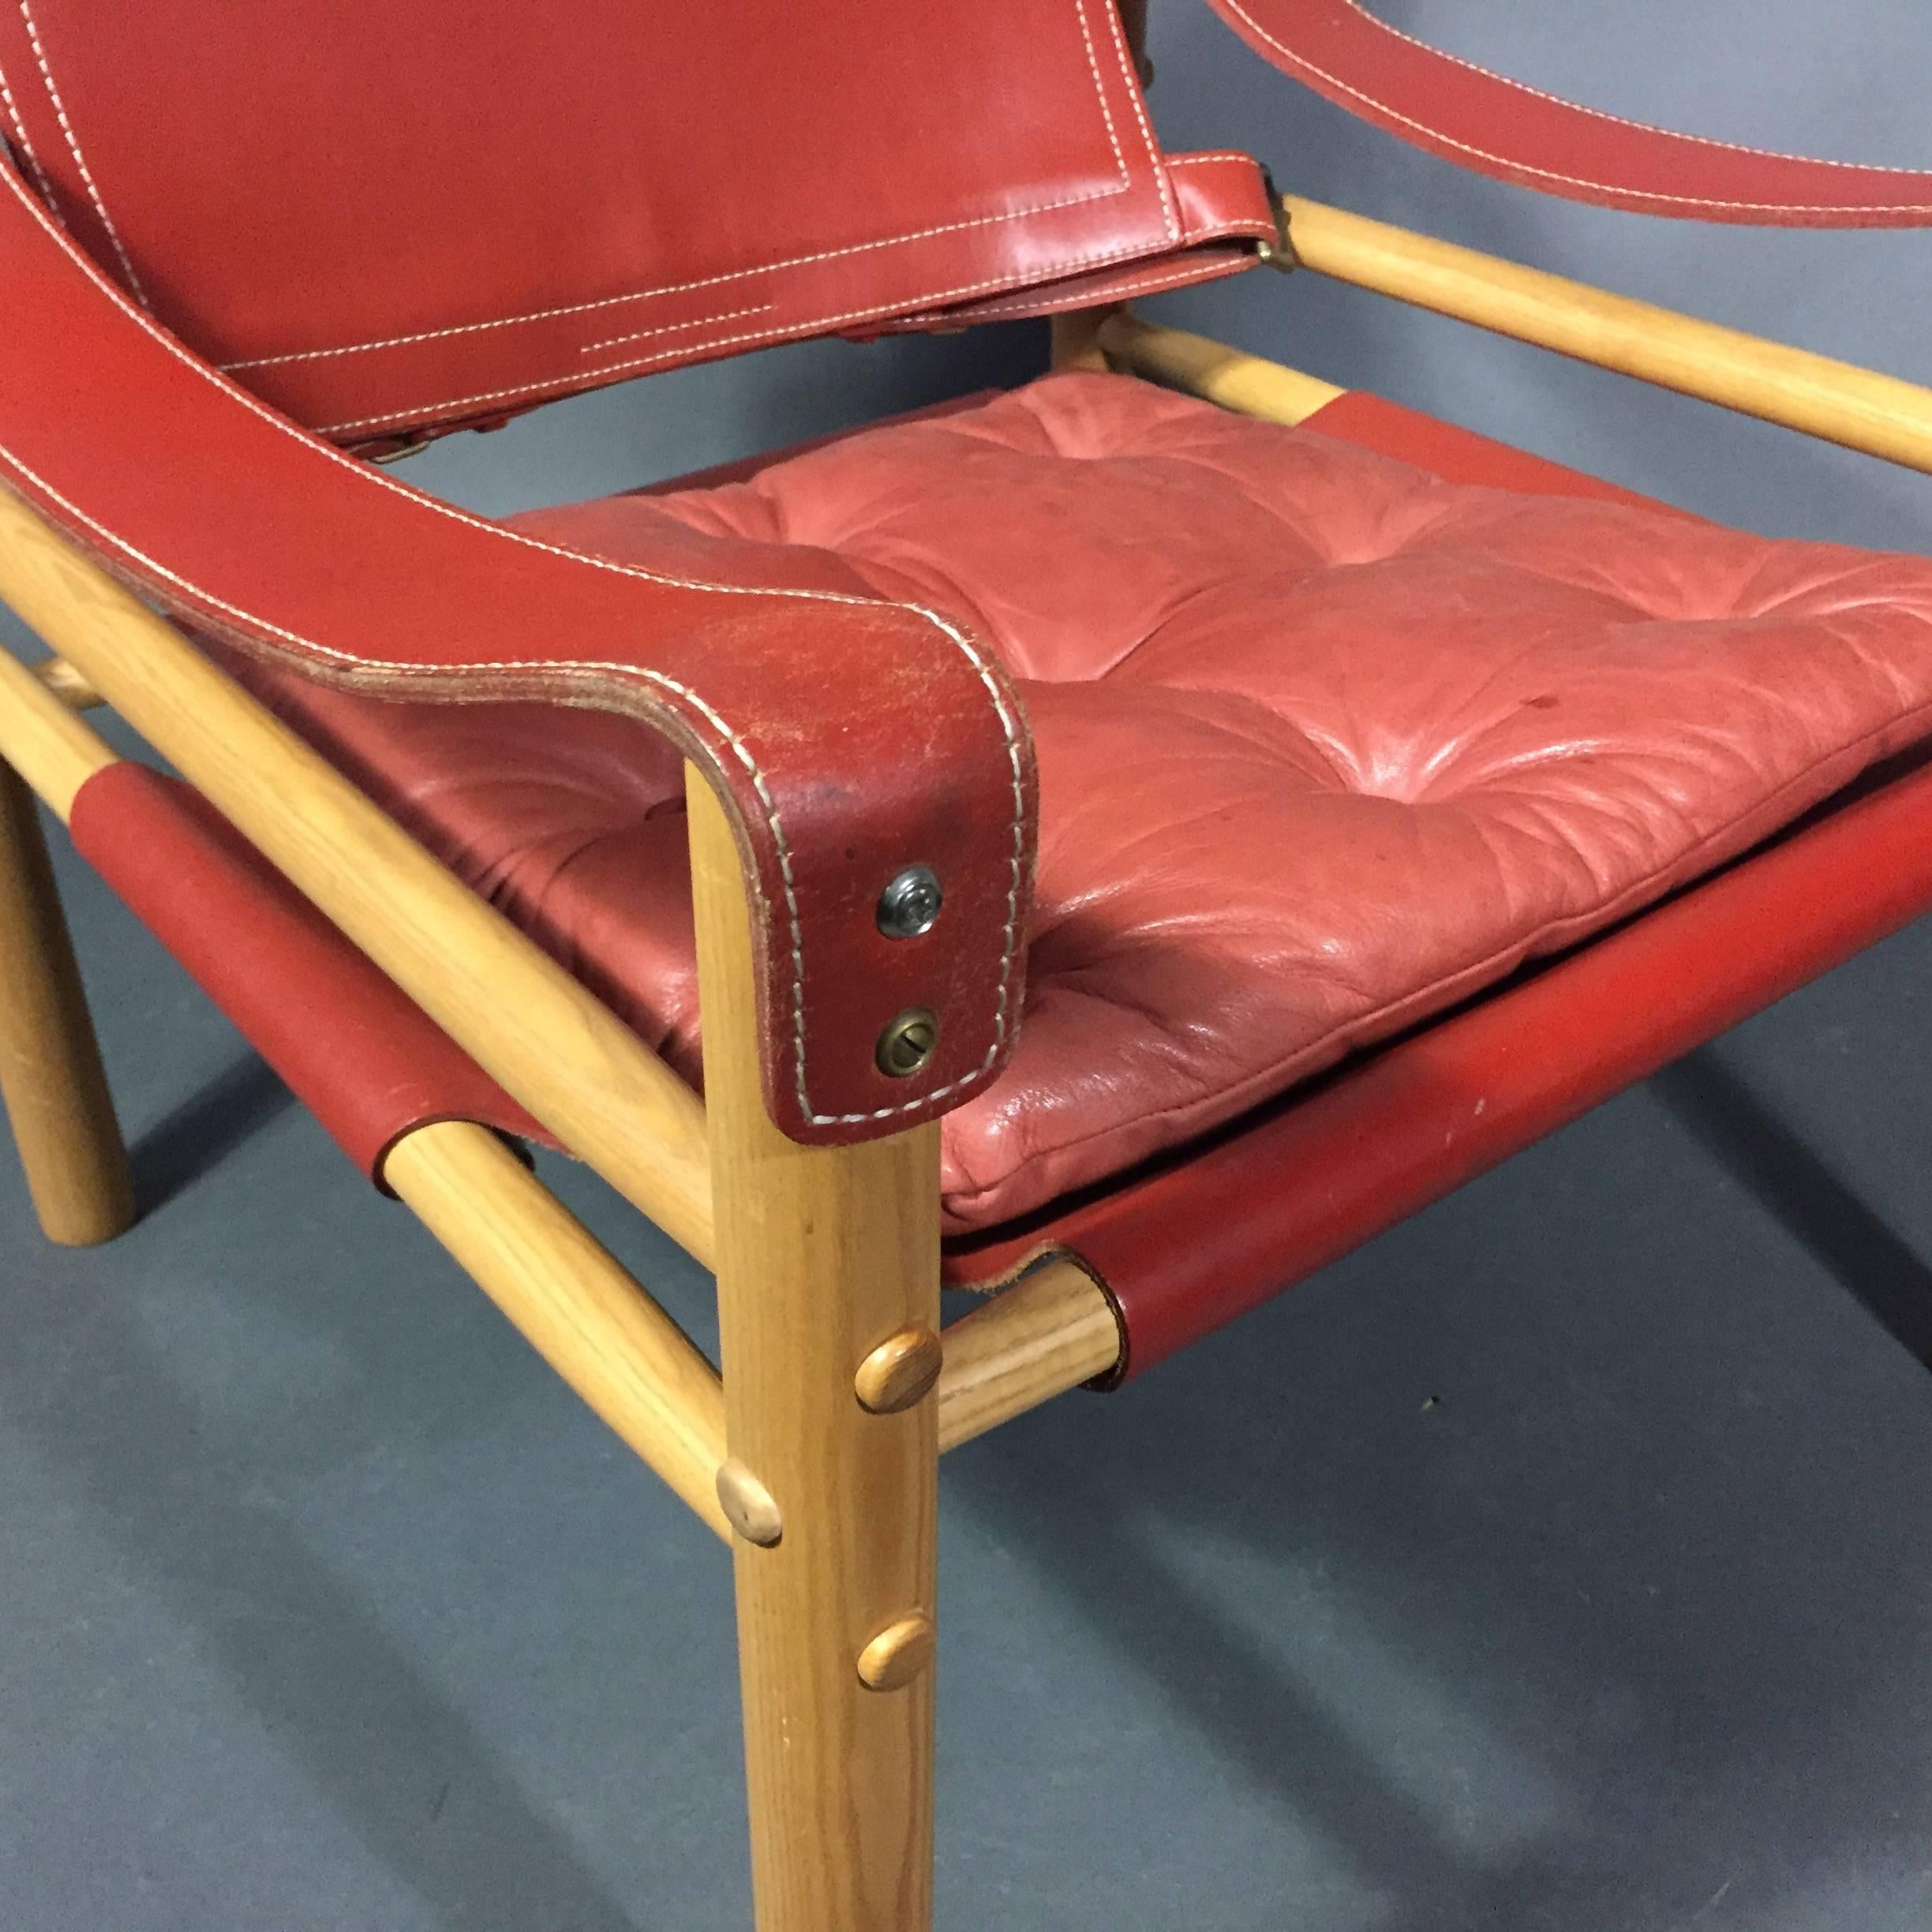 Pair of Arne Norell Red or Orange Leather Sirocco Chairs, Sweden For Sale 4